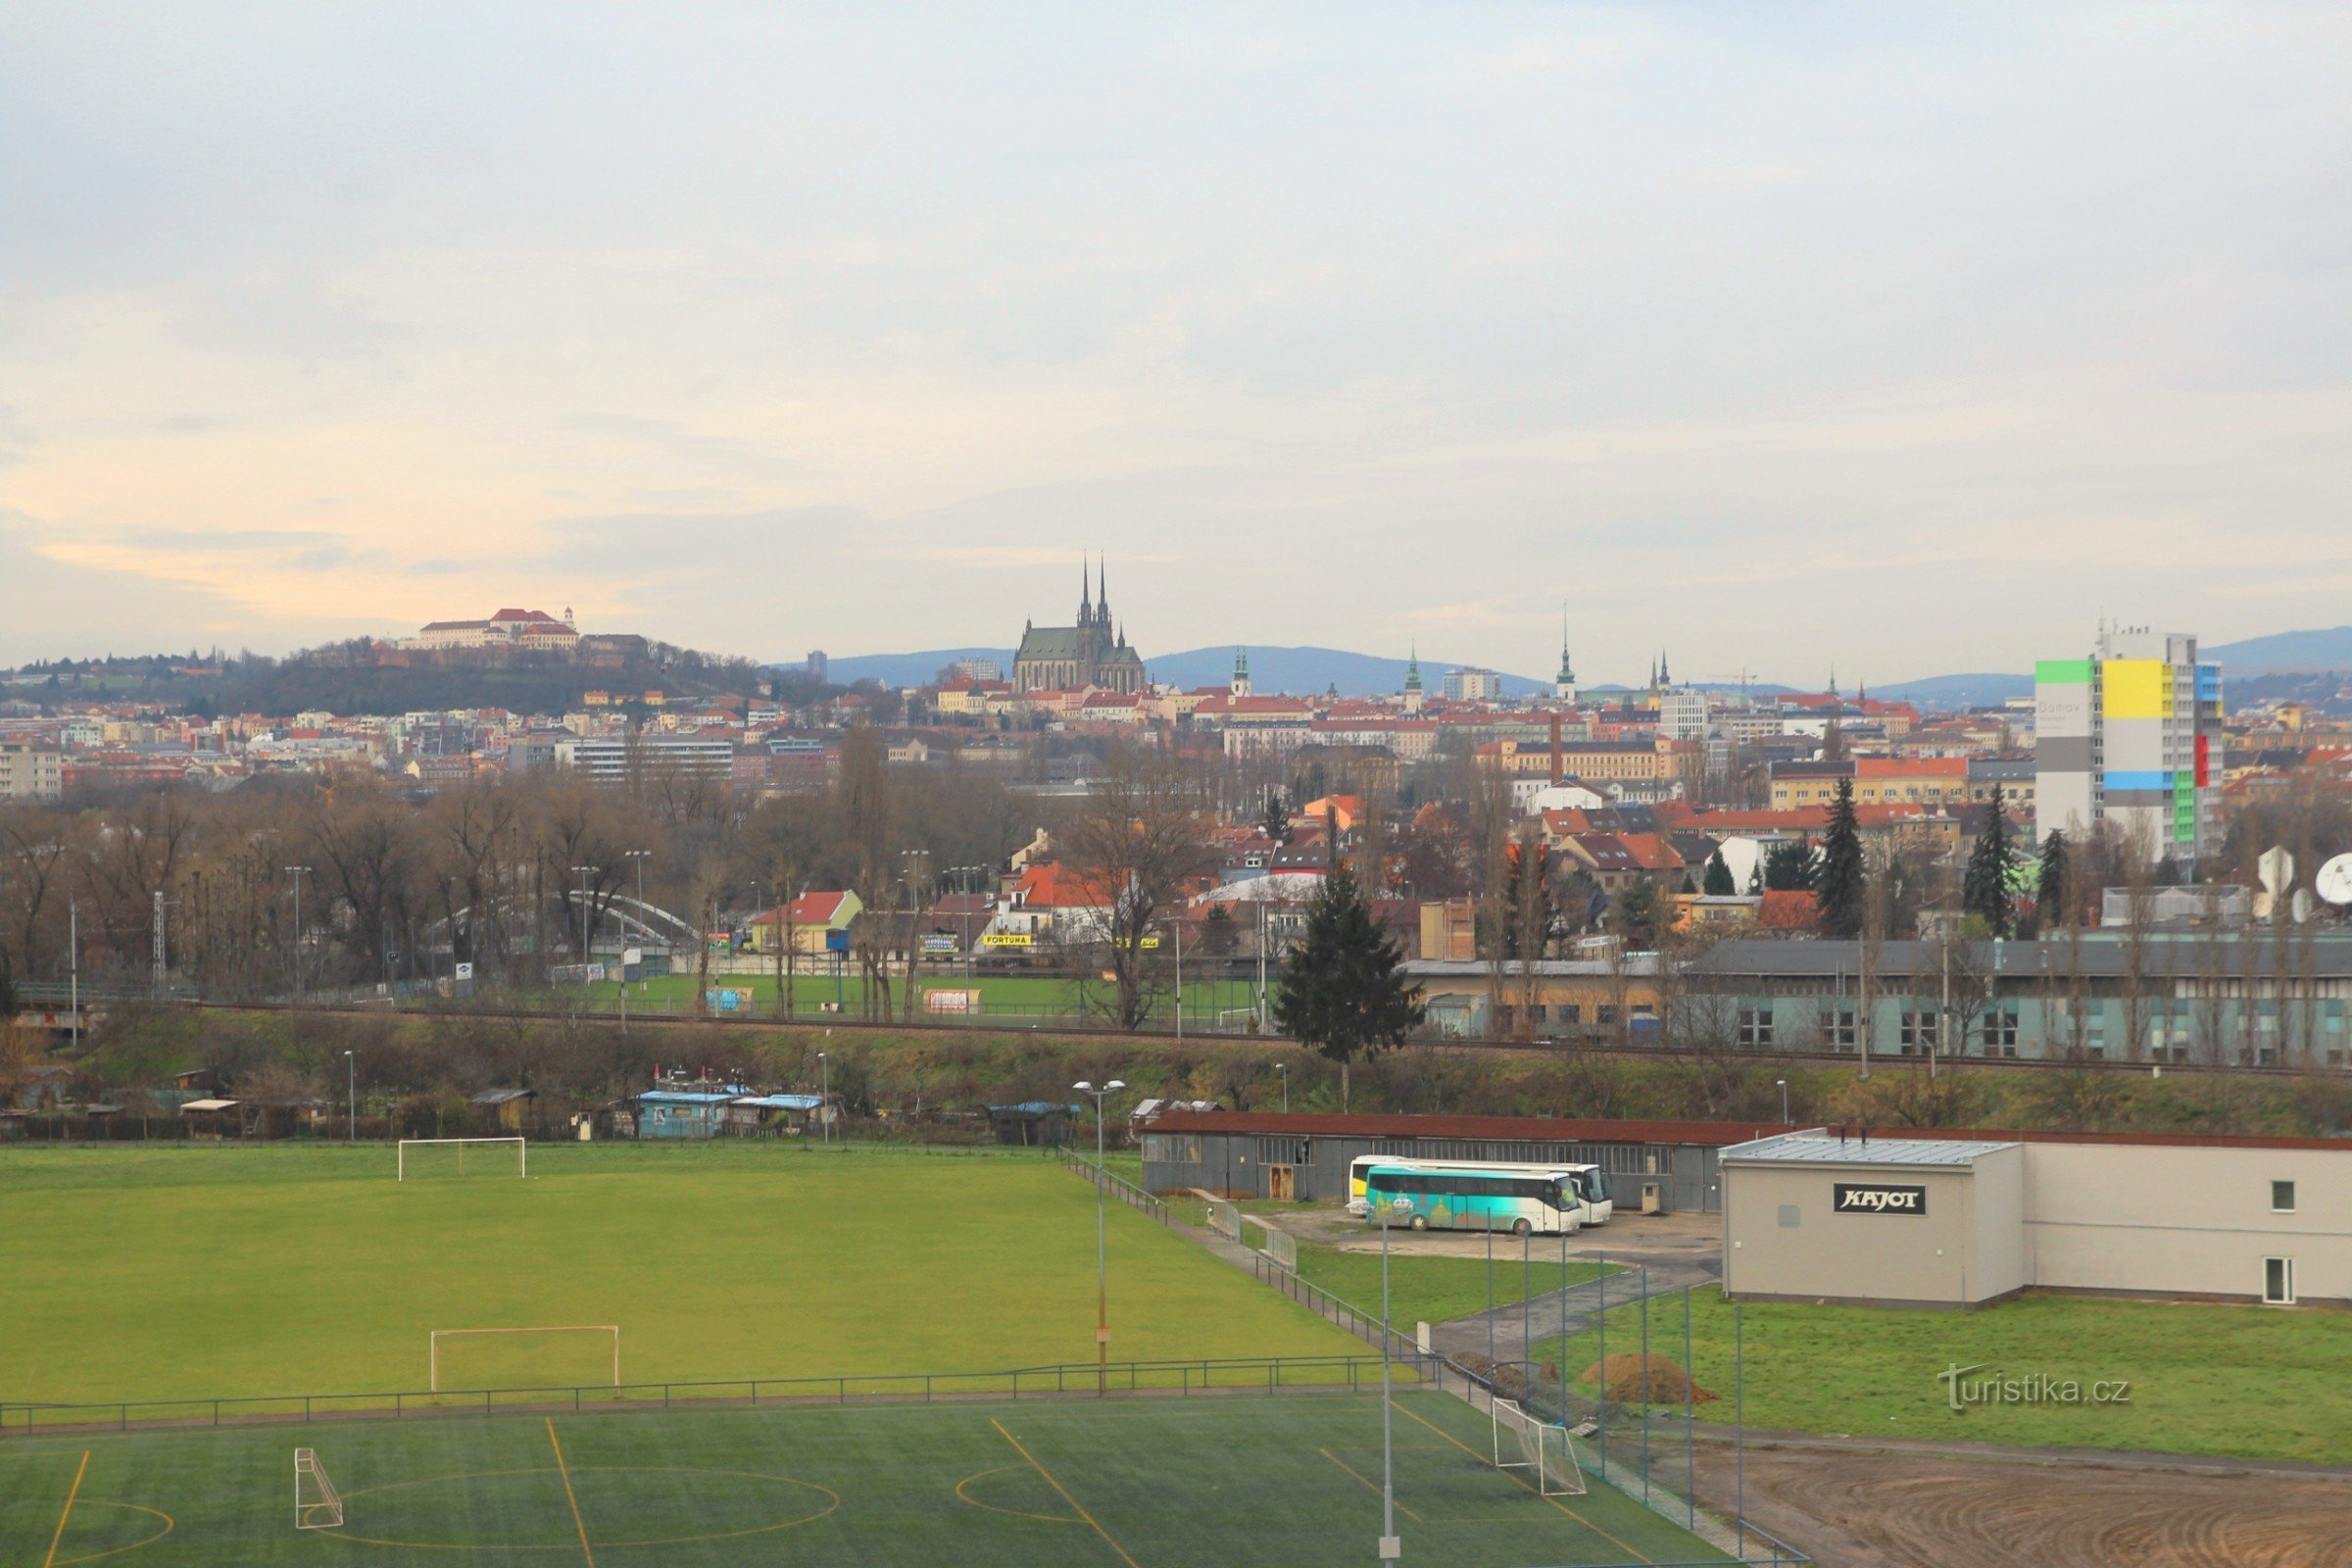 A view of the historic part of Brno with the landmarks of Petrov and Špilberk